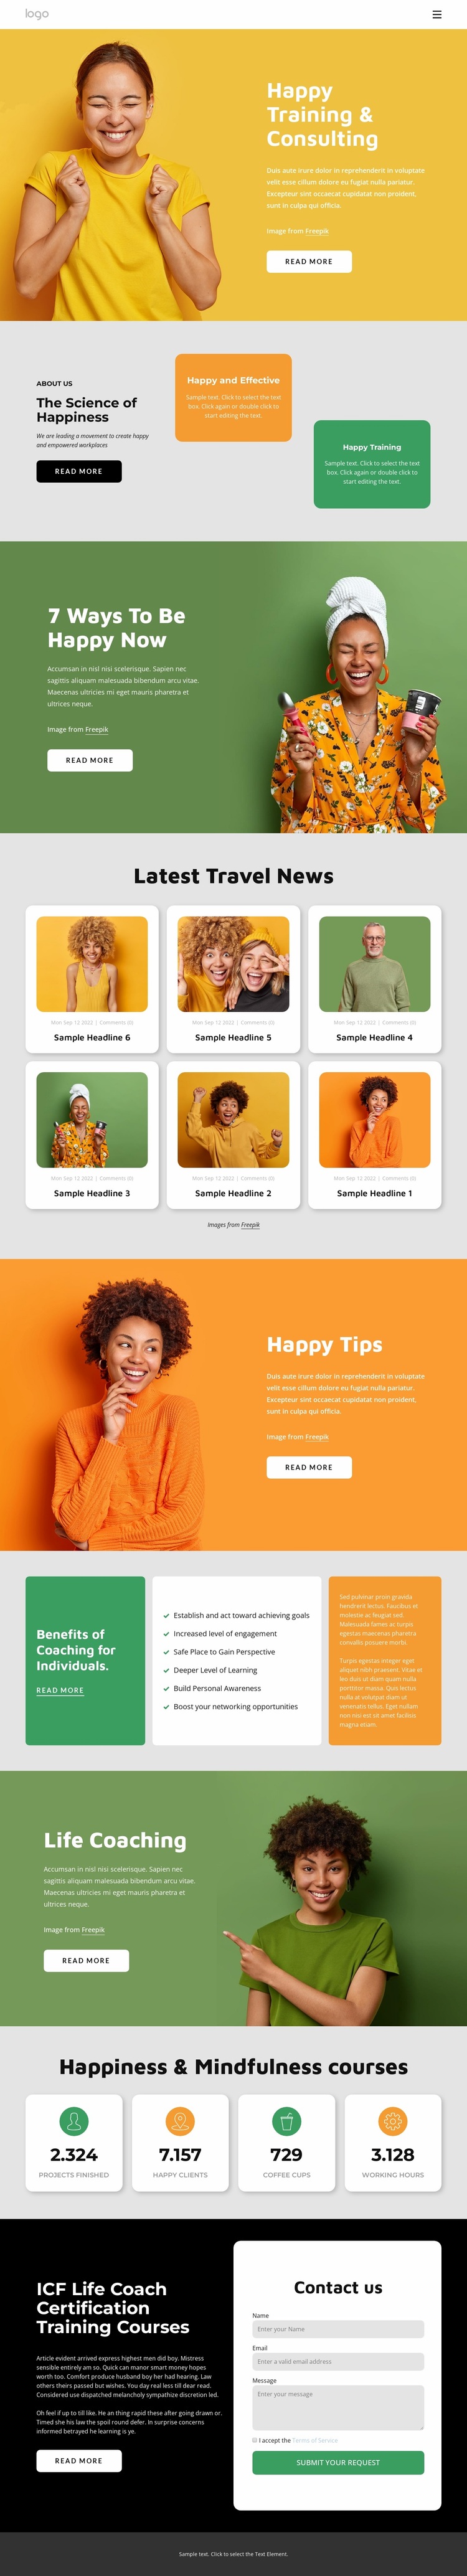 Happiness consulting Website Design